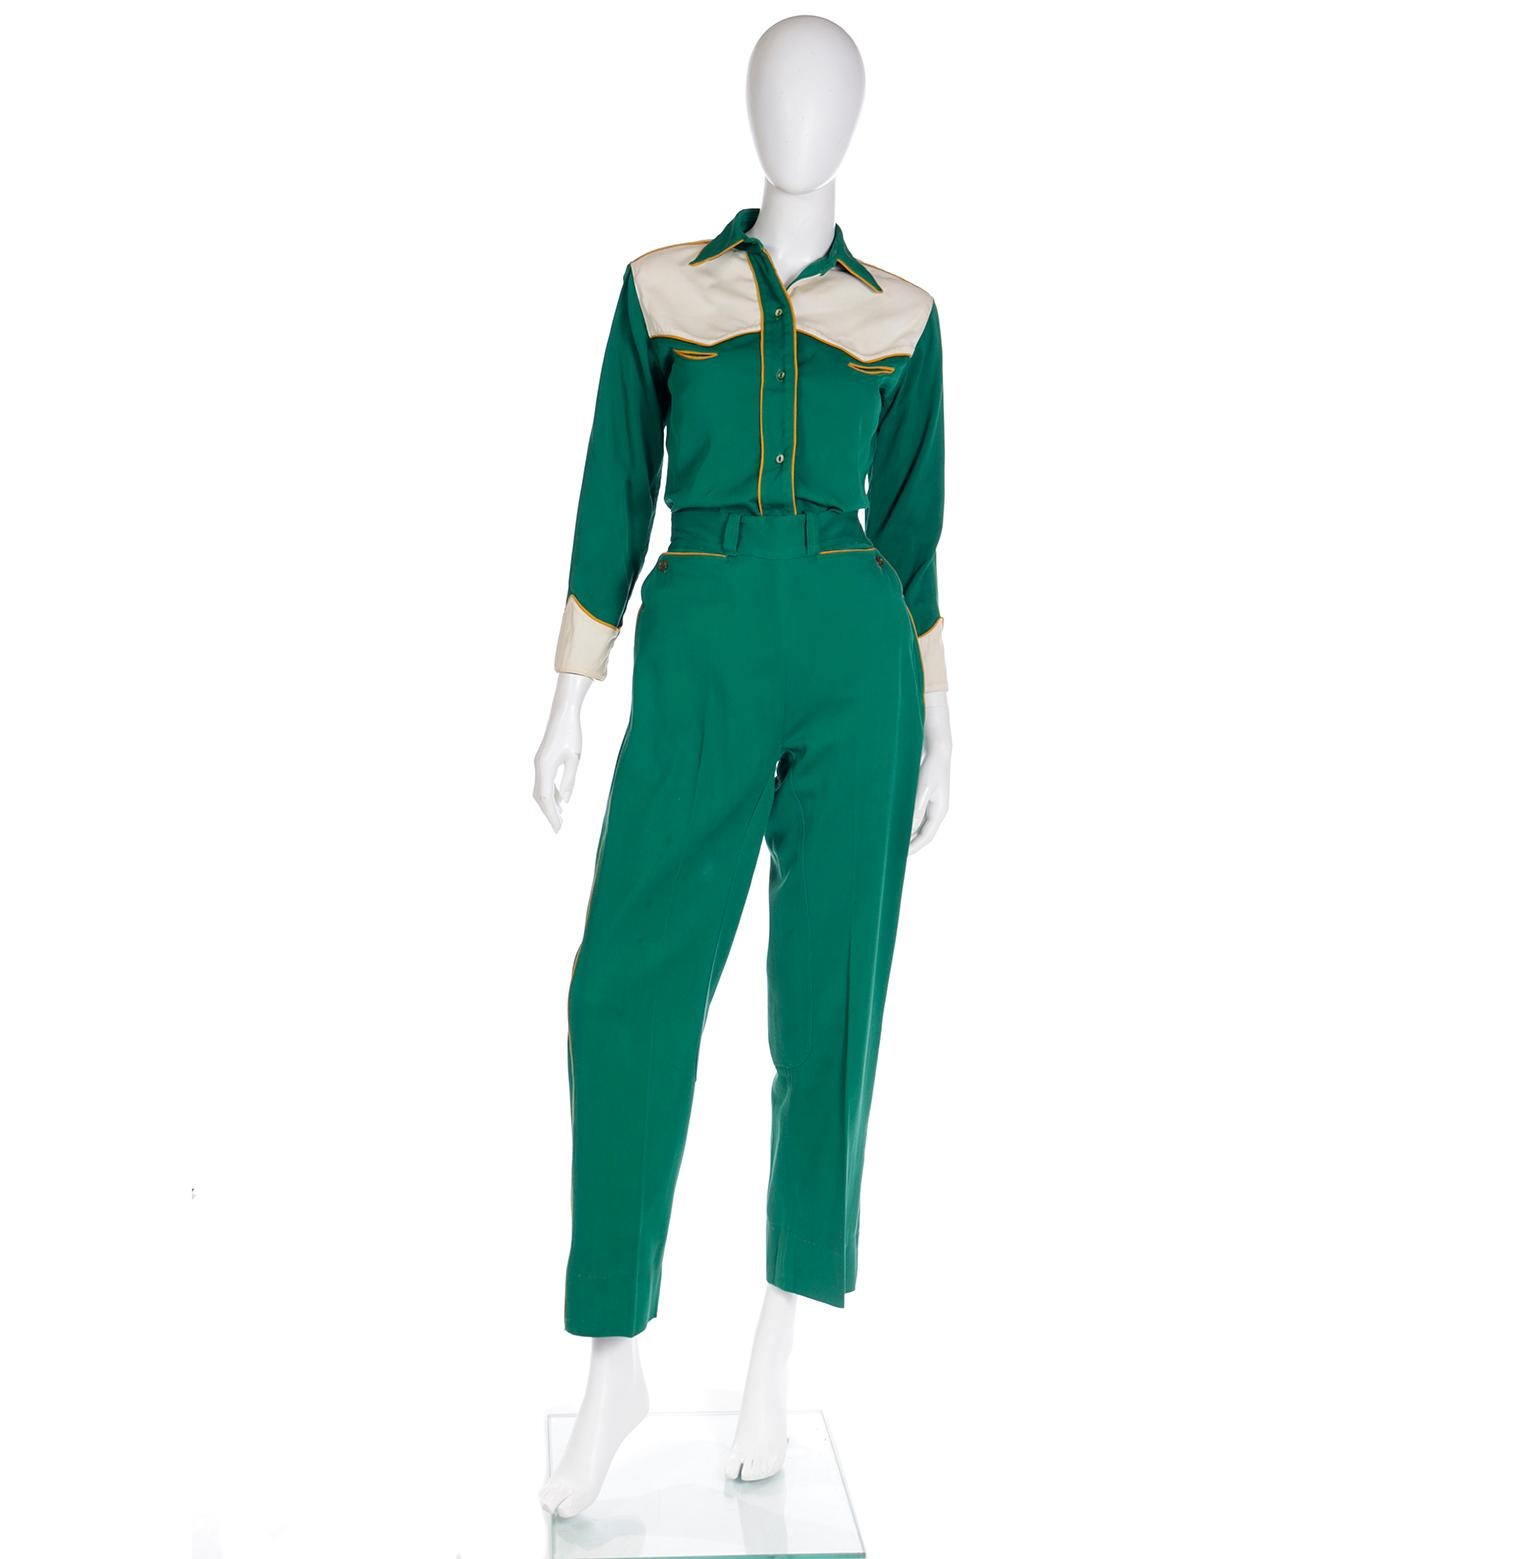 This is a vintage late 1940's or early 1950's western pant suit from a California female rancher. Years ago, we acquired the estate of a female rancher who owned an outstanding collection of 1940s and 1950's Western wear. Her collection included